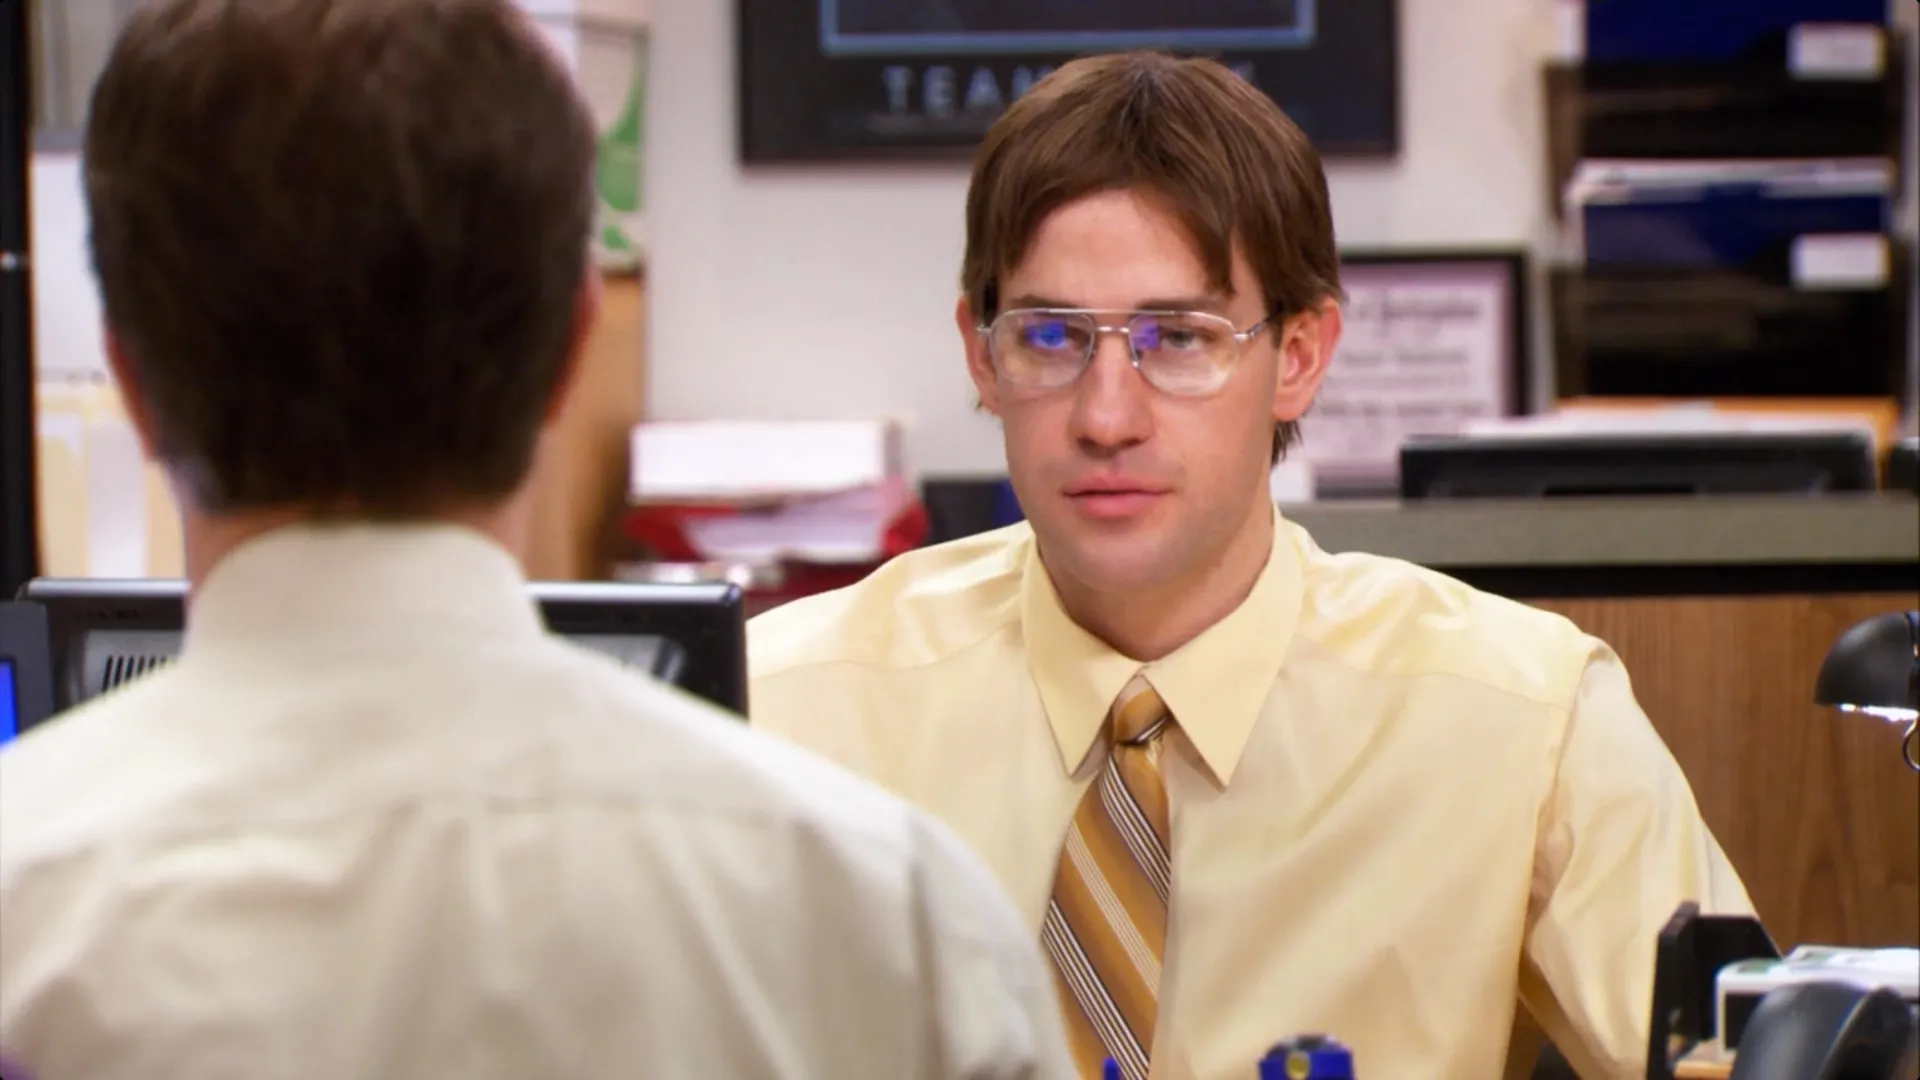 The Office New Series: New Details, Confirmed Cast, and More Jim